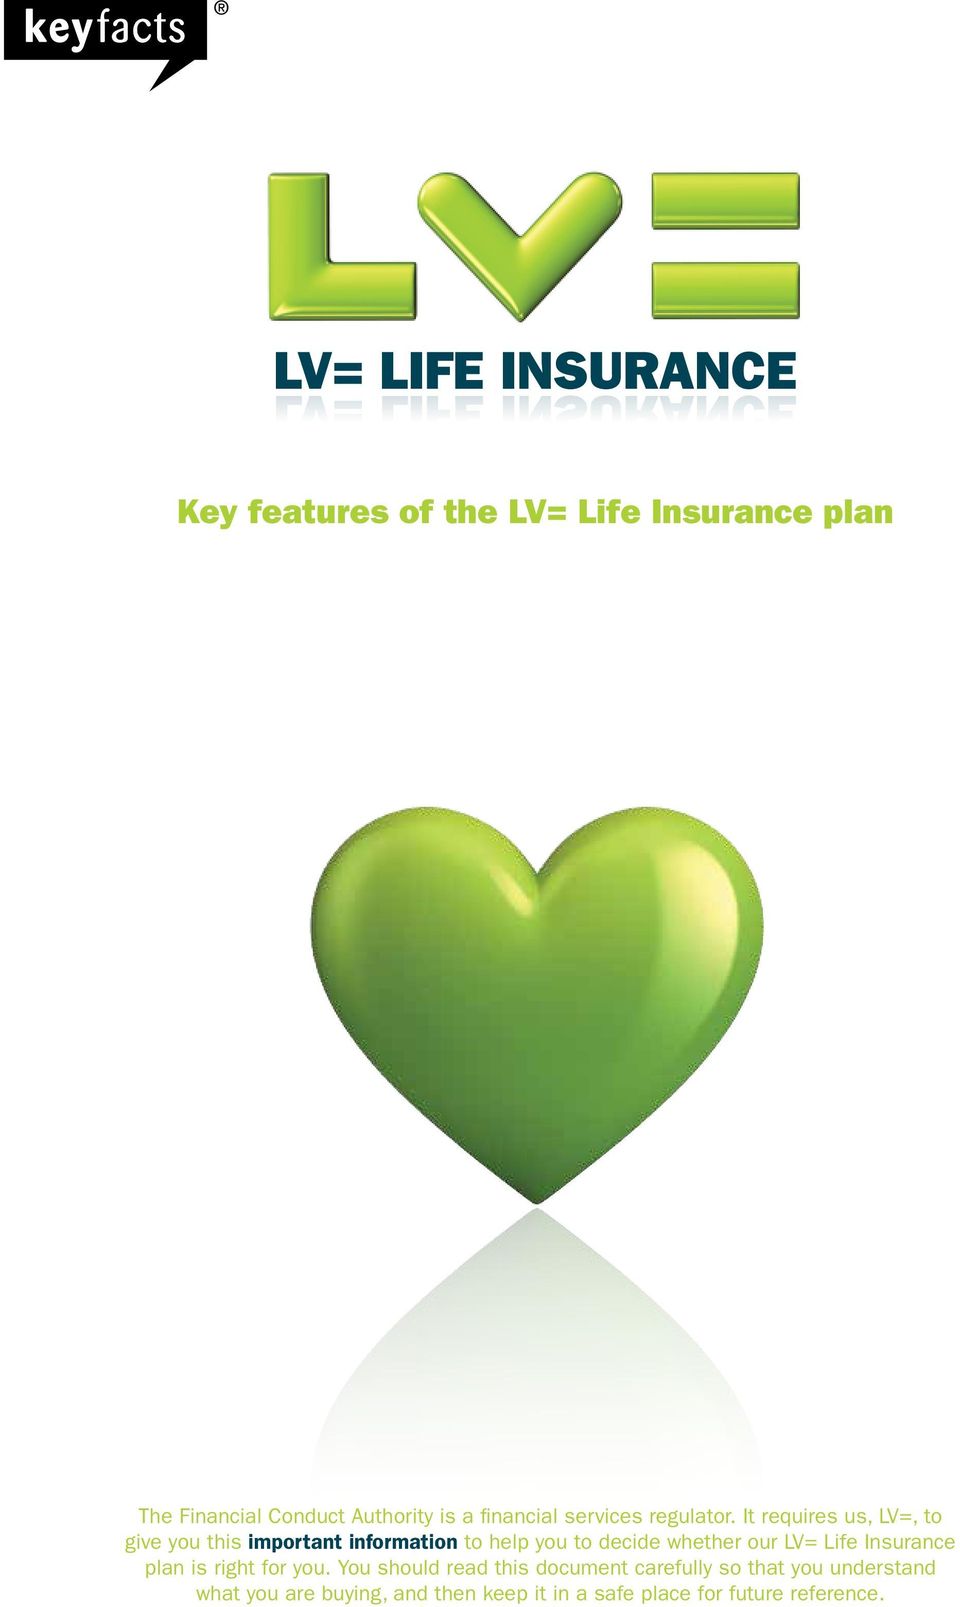 It requires us, LV=, to give you this important information to help you to decide whether our LV= Life